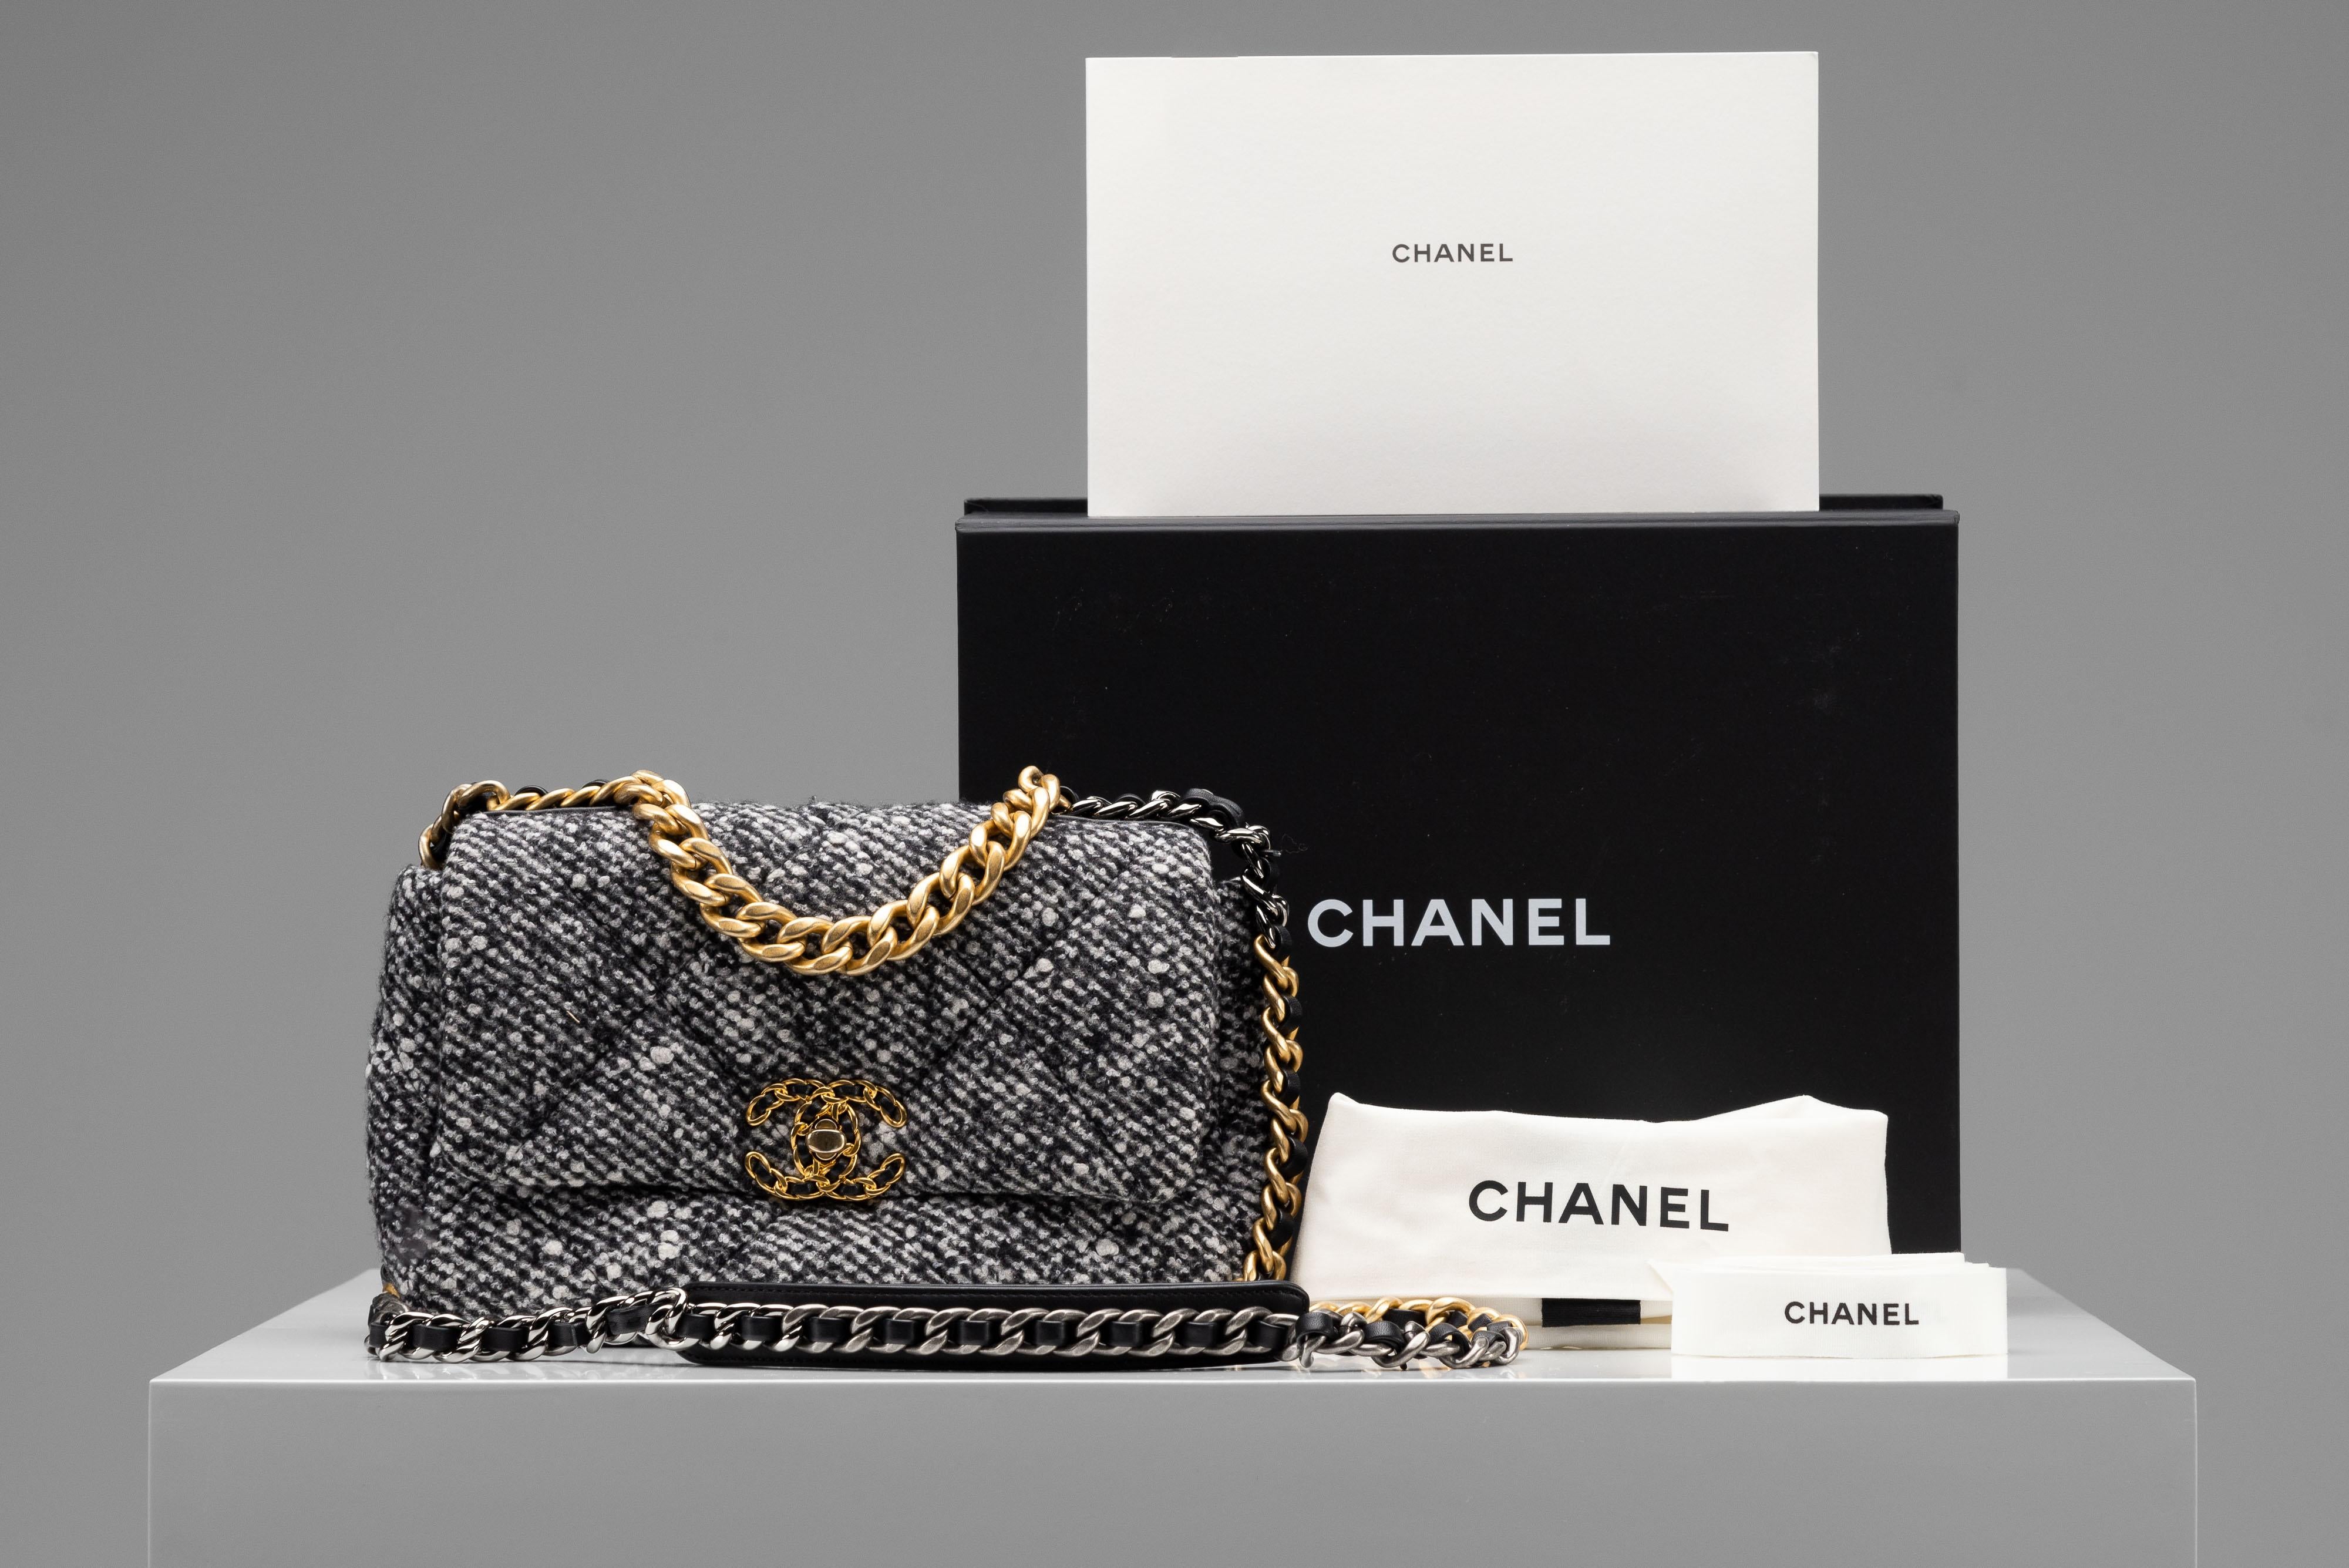 From the collection of SAVINETI we offer this Chanel 19 Flap Bag:

- Brand: Chanel
- Model: 19 (Small/ Regular 26cm)
- Color: Tweed (Black/ White/ Grey)
- Year: 2021
- Condition: Excellent 
- Materials: Tweed, Gold-Color Hardware
- Extras: Full-Set